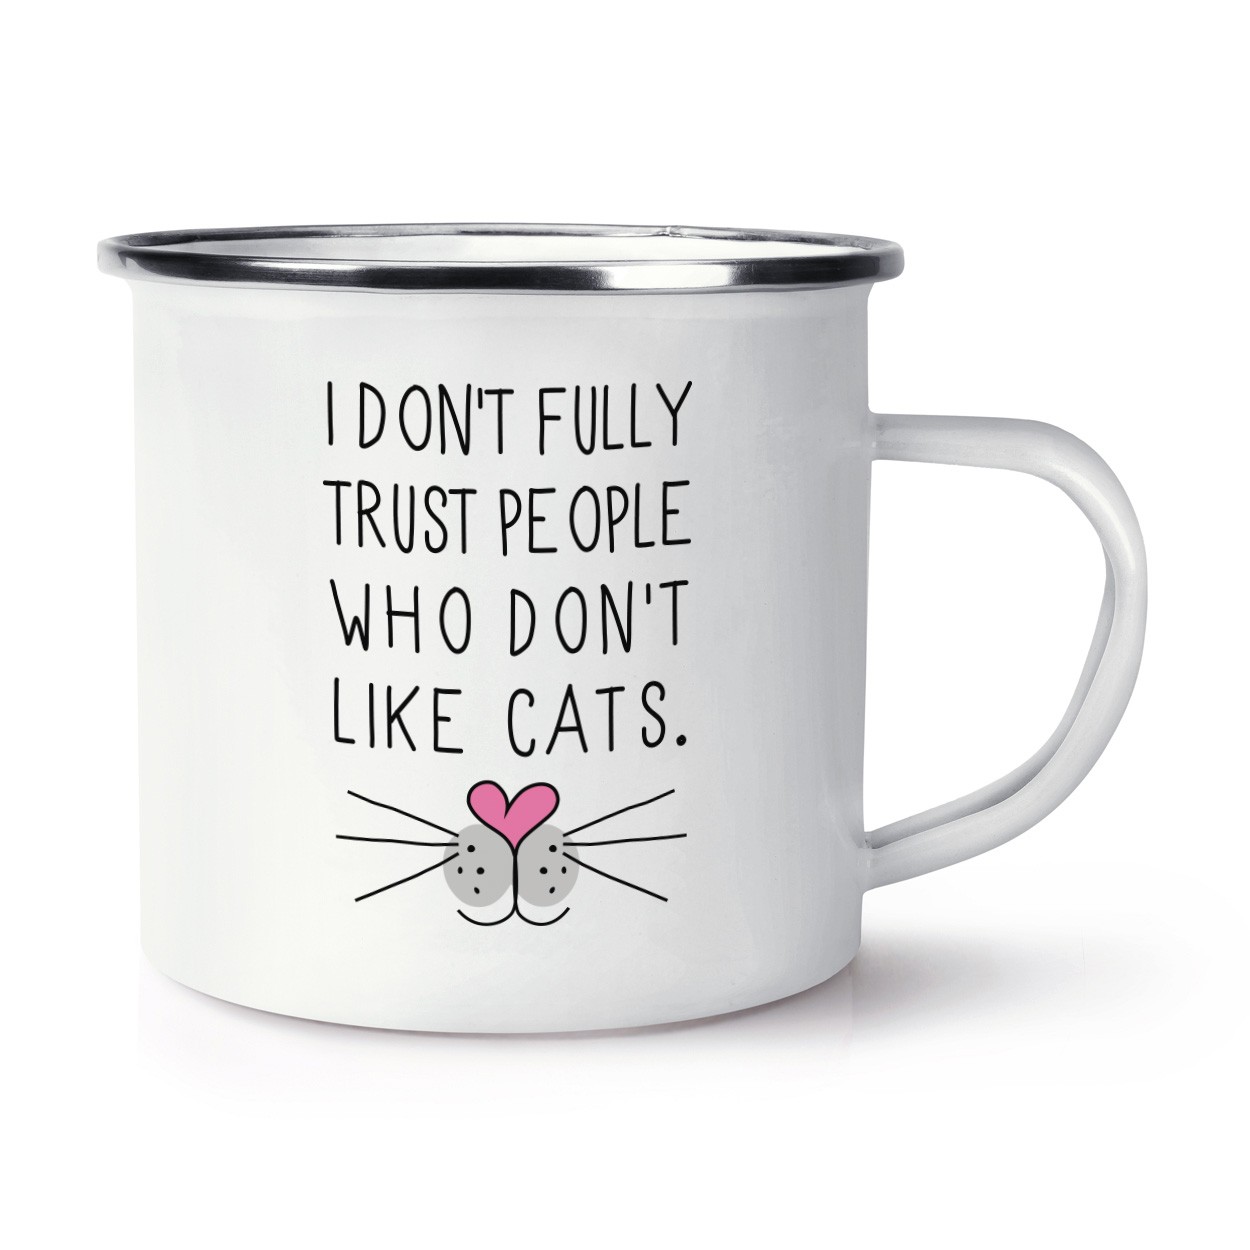 I Don't Fully Trust People Who Don't Like Cats Retro Enamel Mug Cup